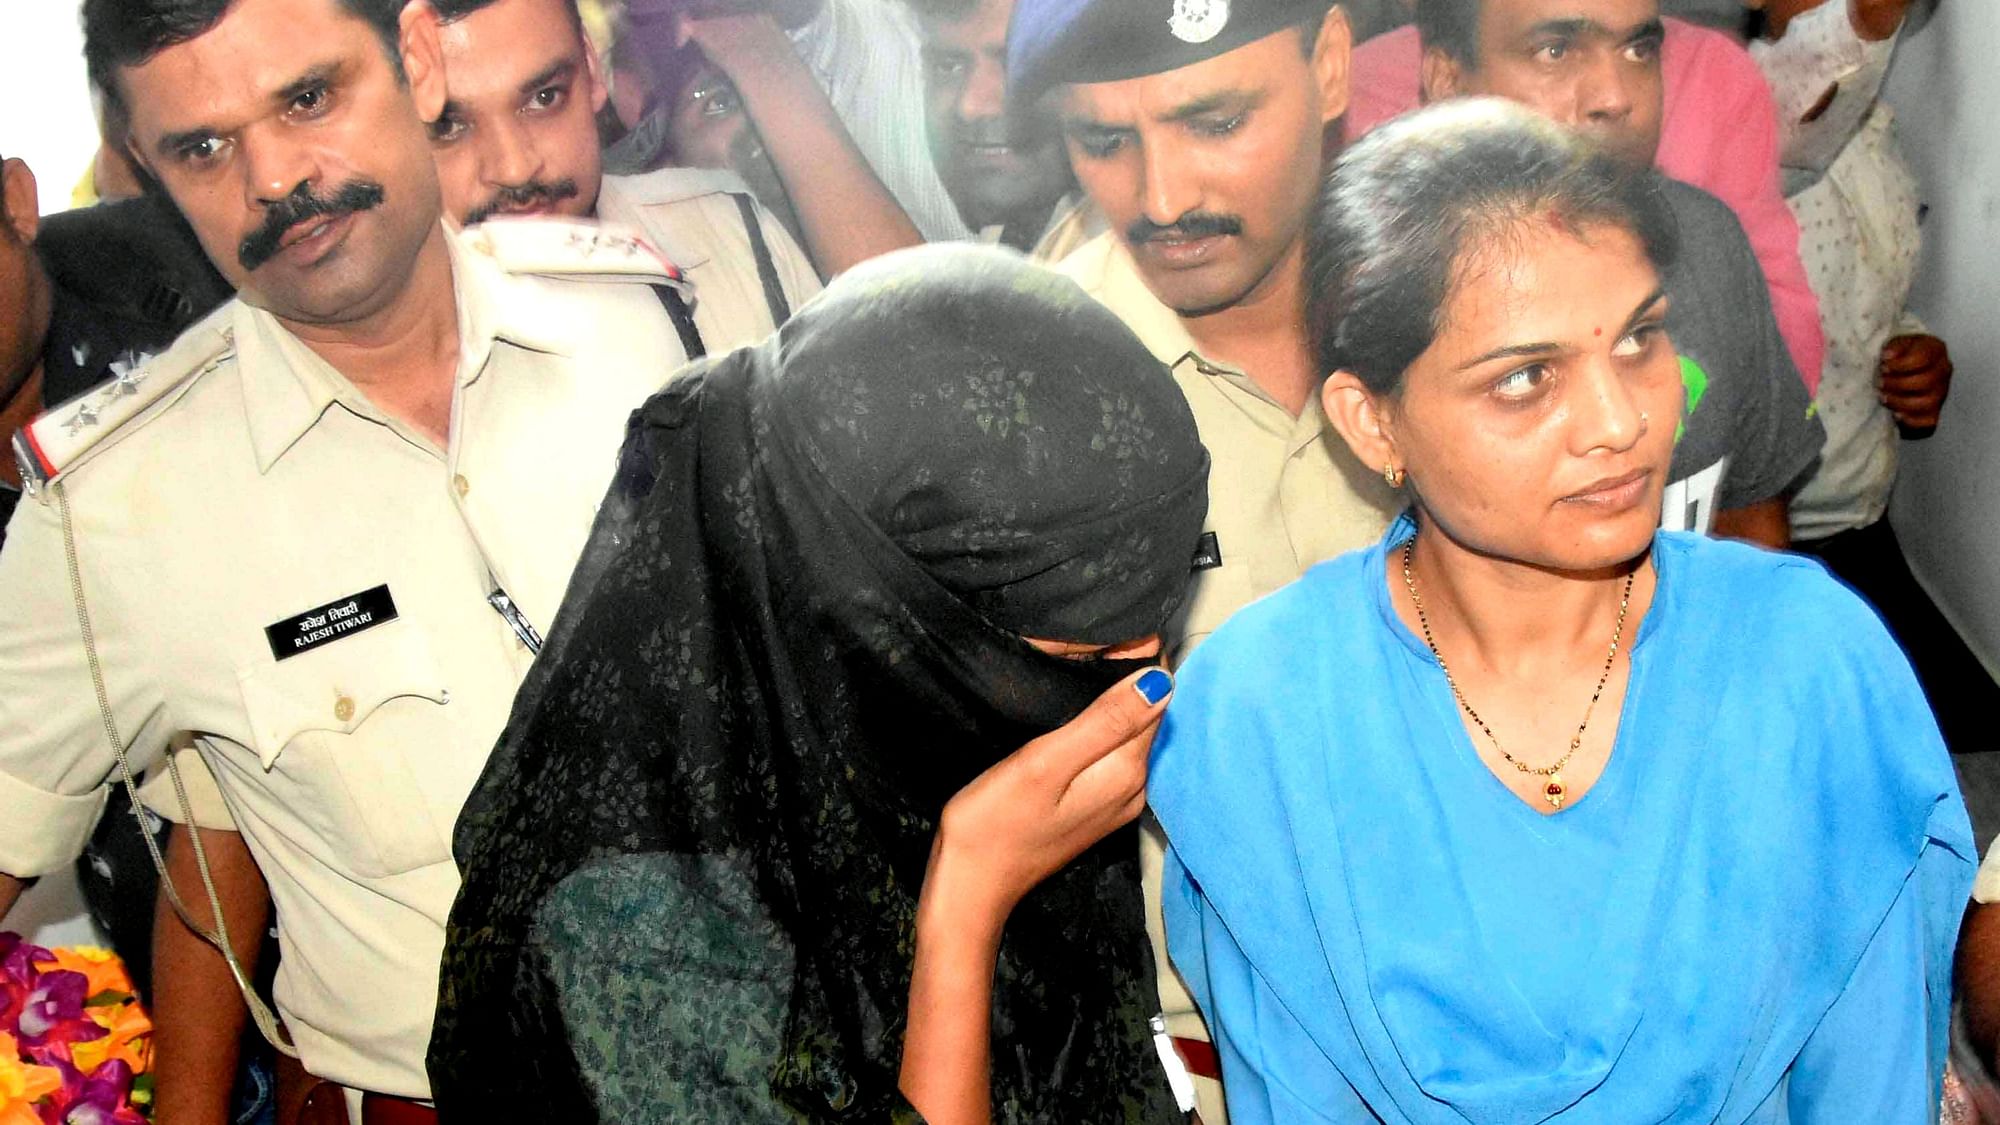 Indore police produce Monica Yadav, one of the accused in the honey-trapping case for spot investigations in Bhopal.